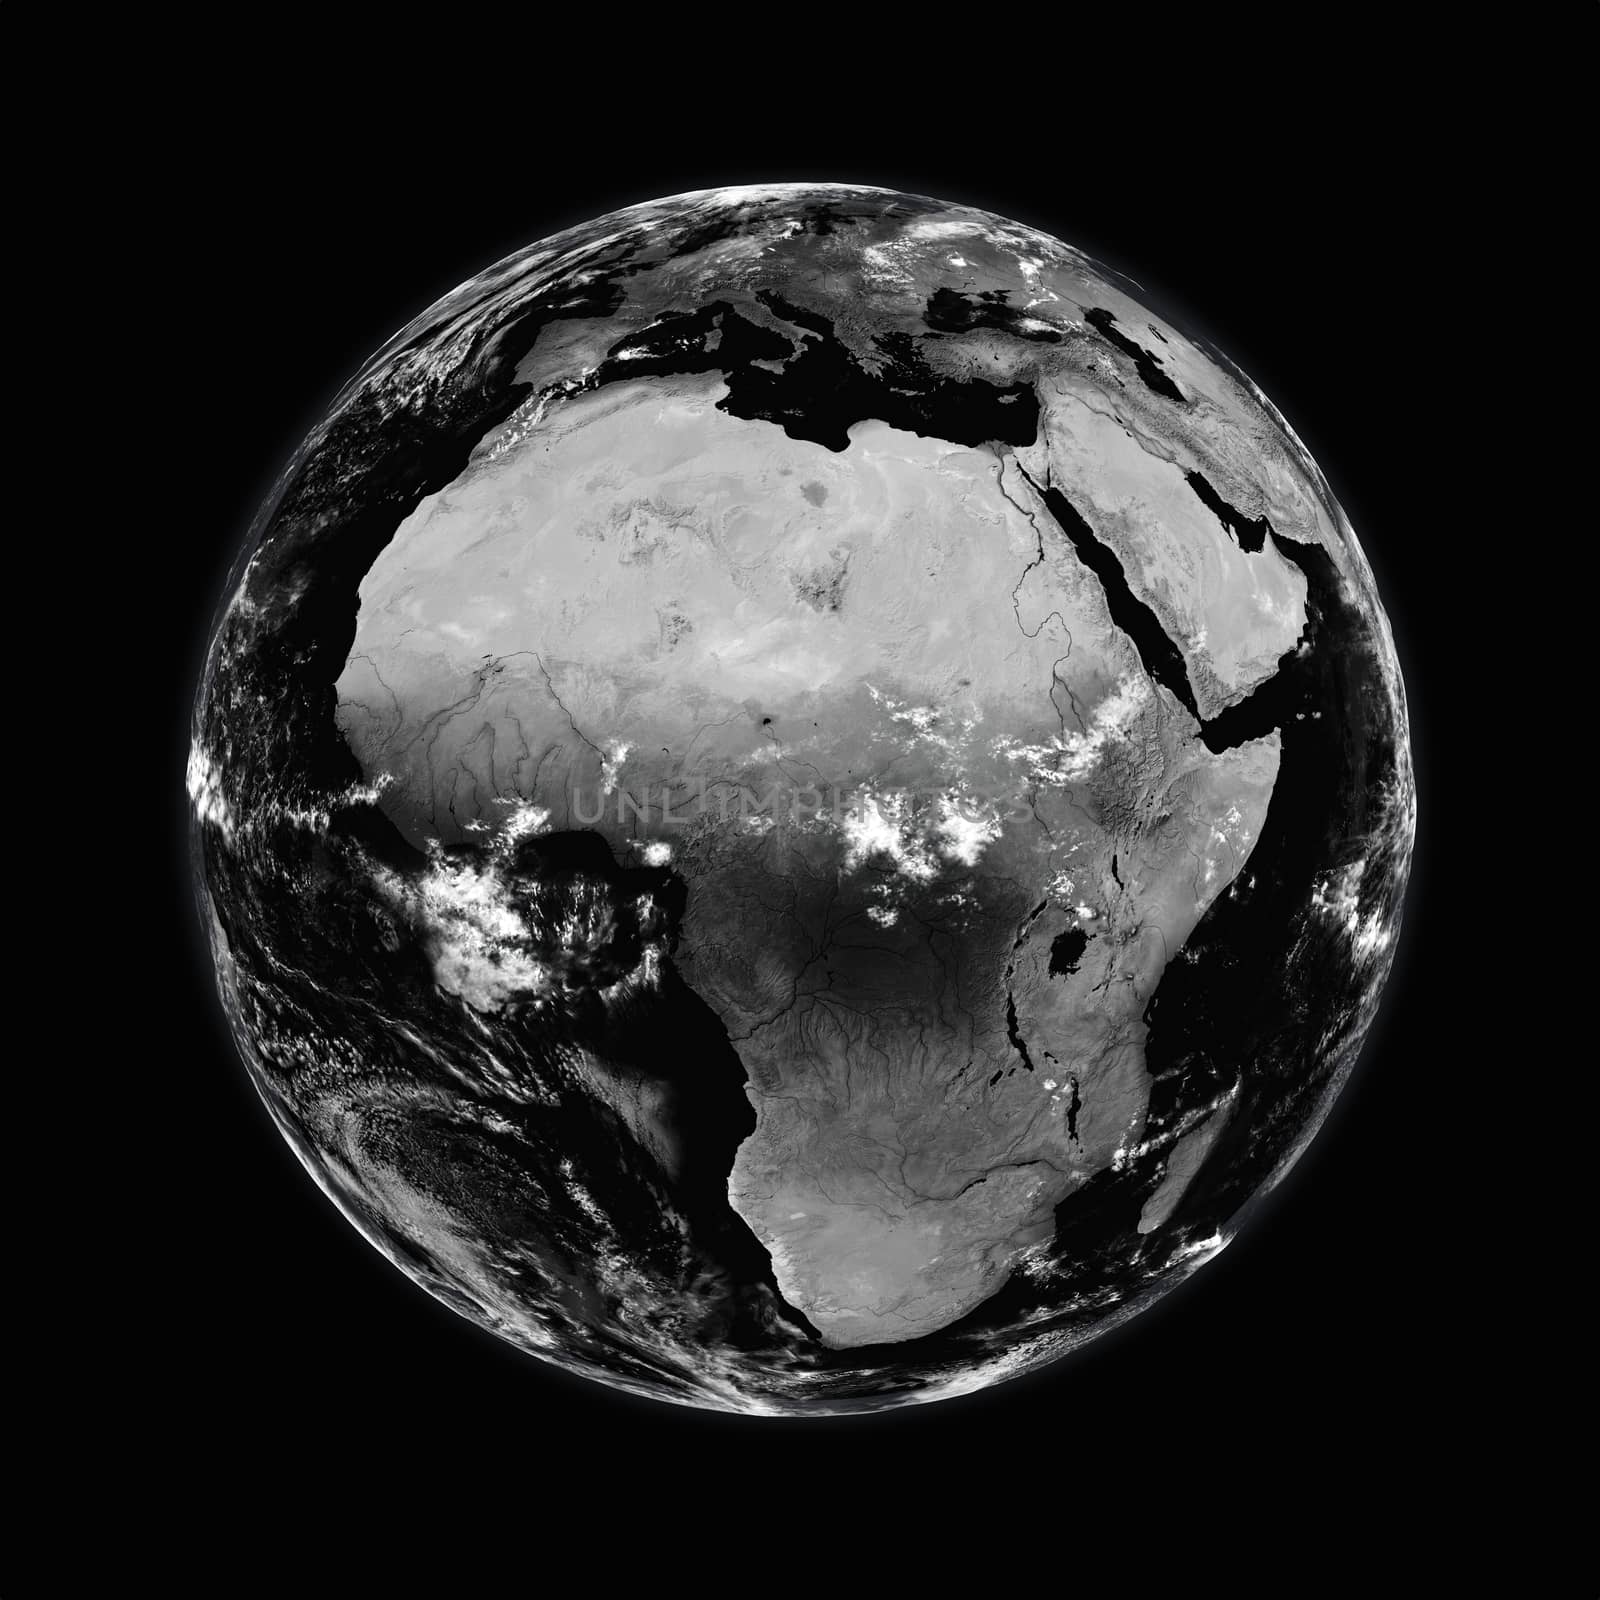 Africa on black planet Earth isolated on black background. Elements of this image furnished by NASA.